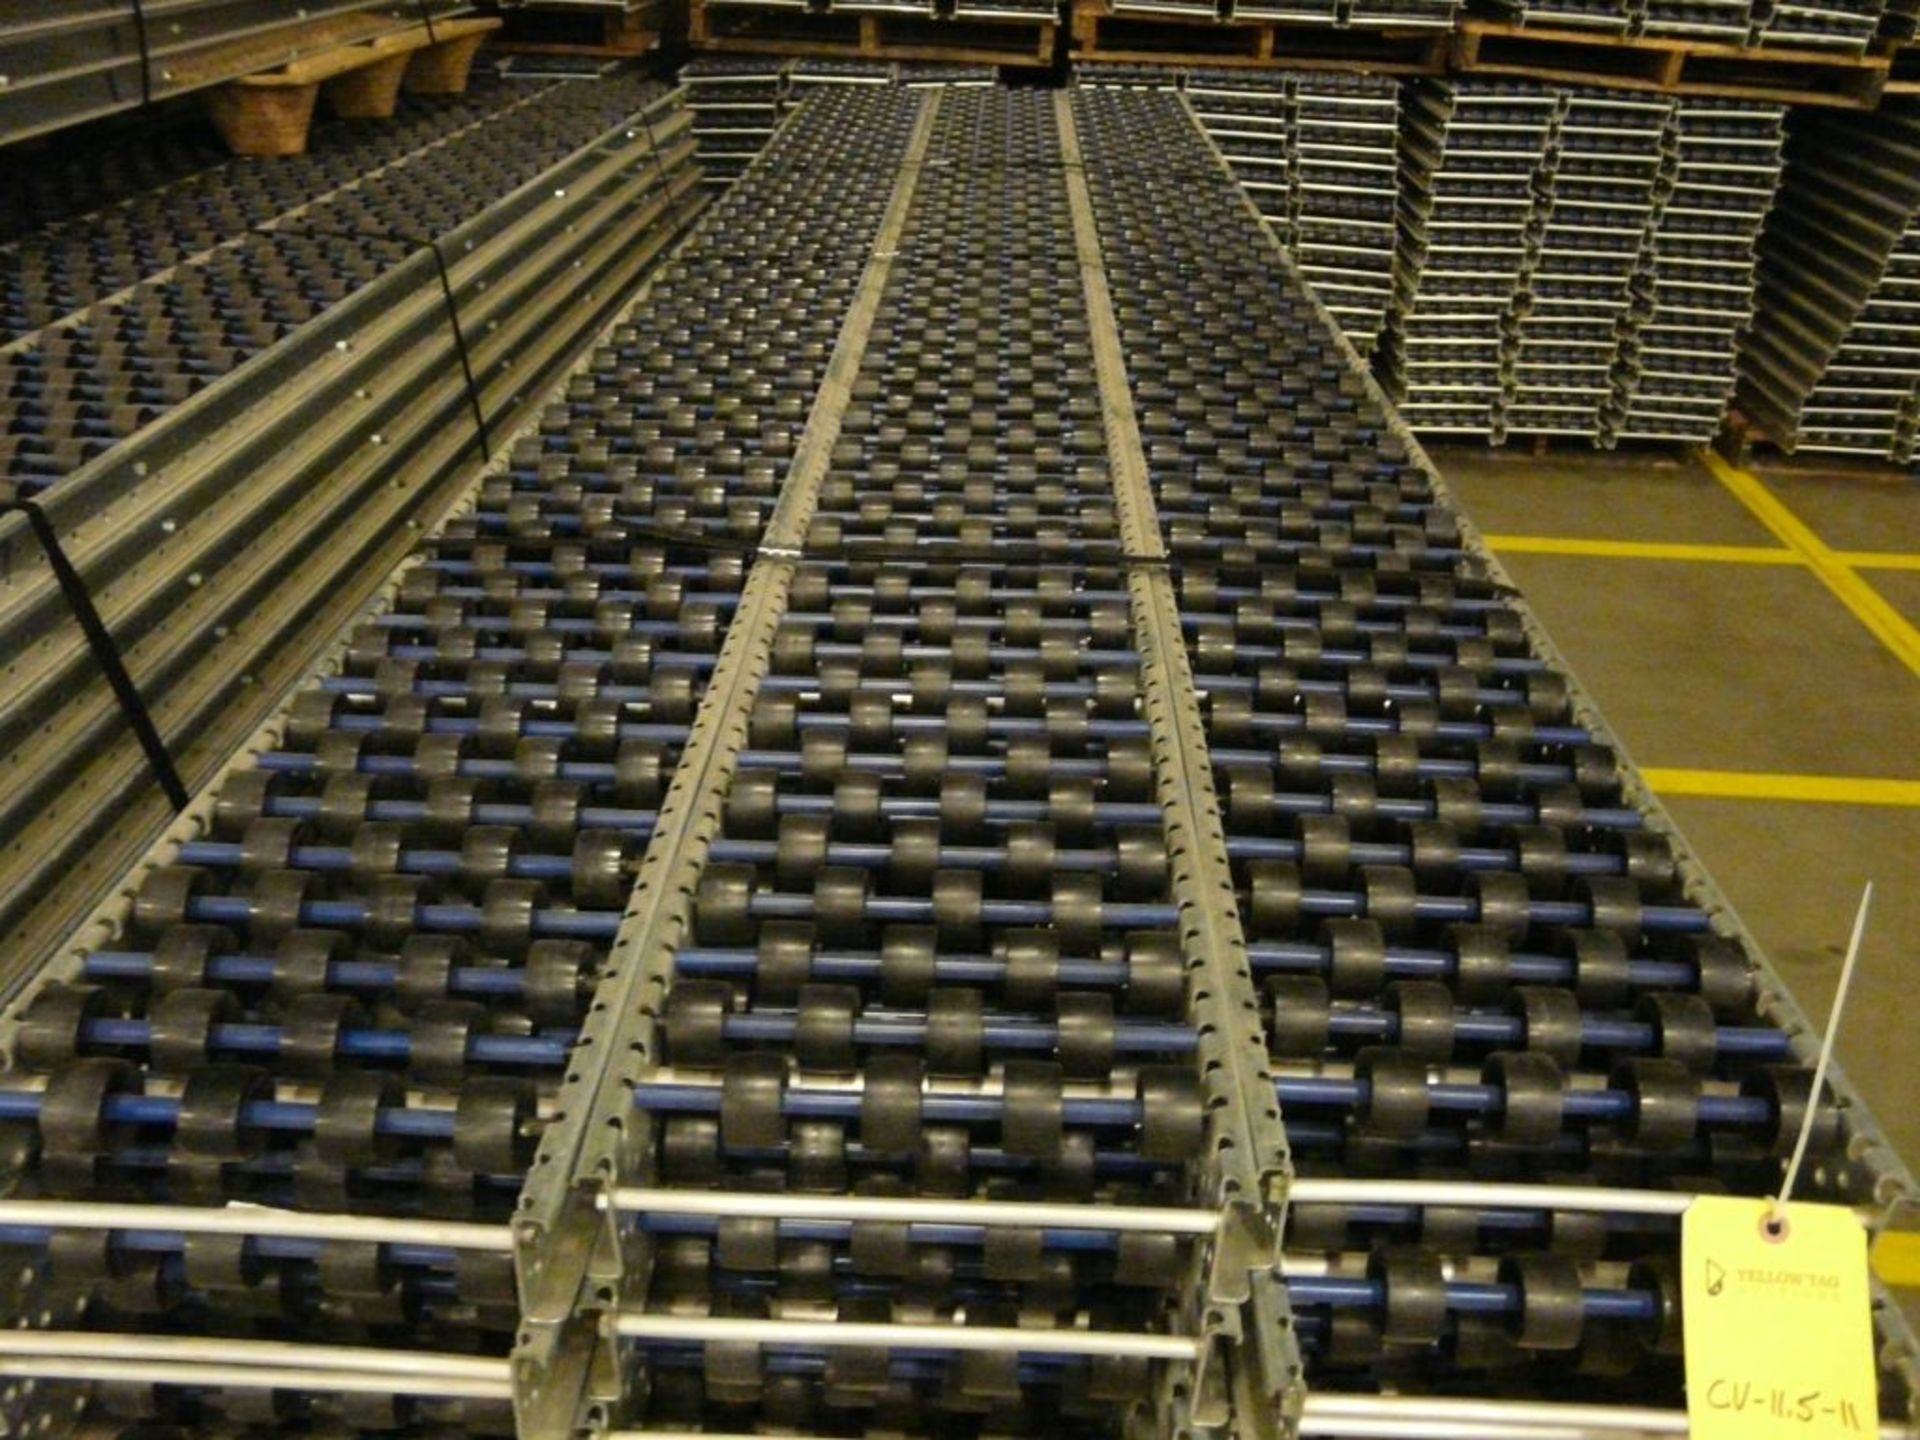 Lot of (90) SpanTrack Wheelbed Carton Flow Conveyors - 11.5'L x 11"W; Tag: 223602 - $30 Lot - Image 3 of 4